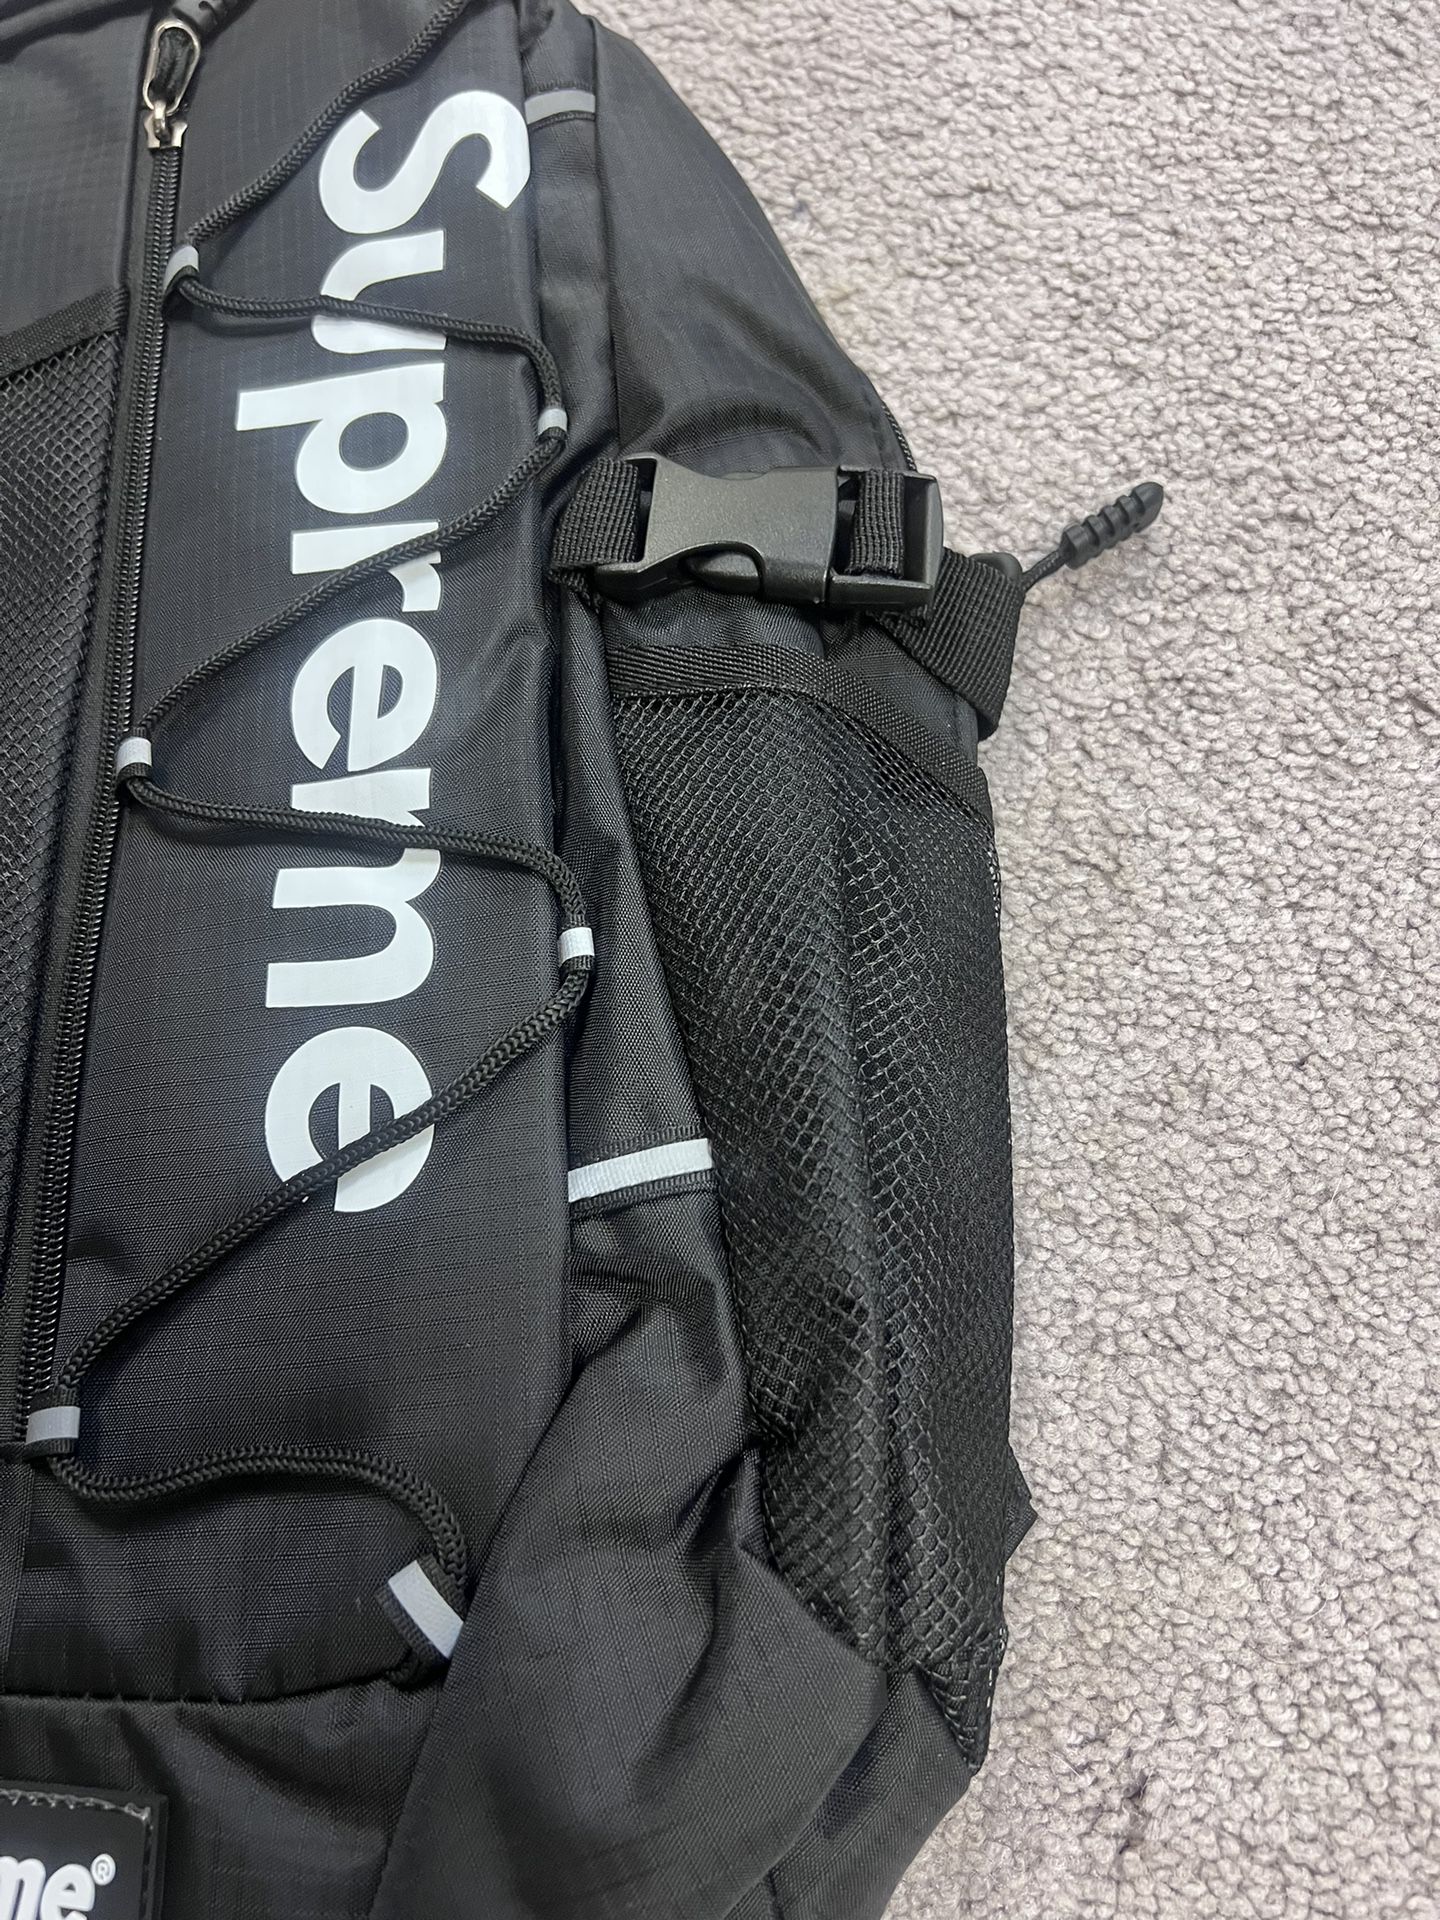 Supreme Backpack SS21 for Sale in Pompano Beach, FL - OfferUp